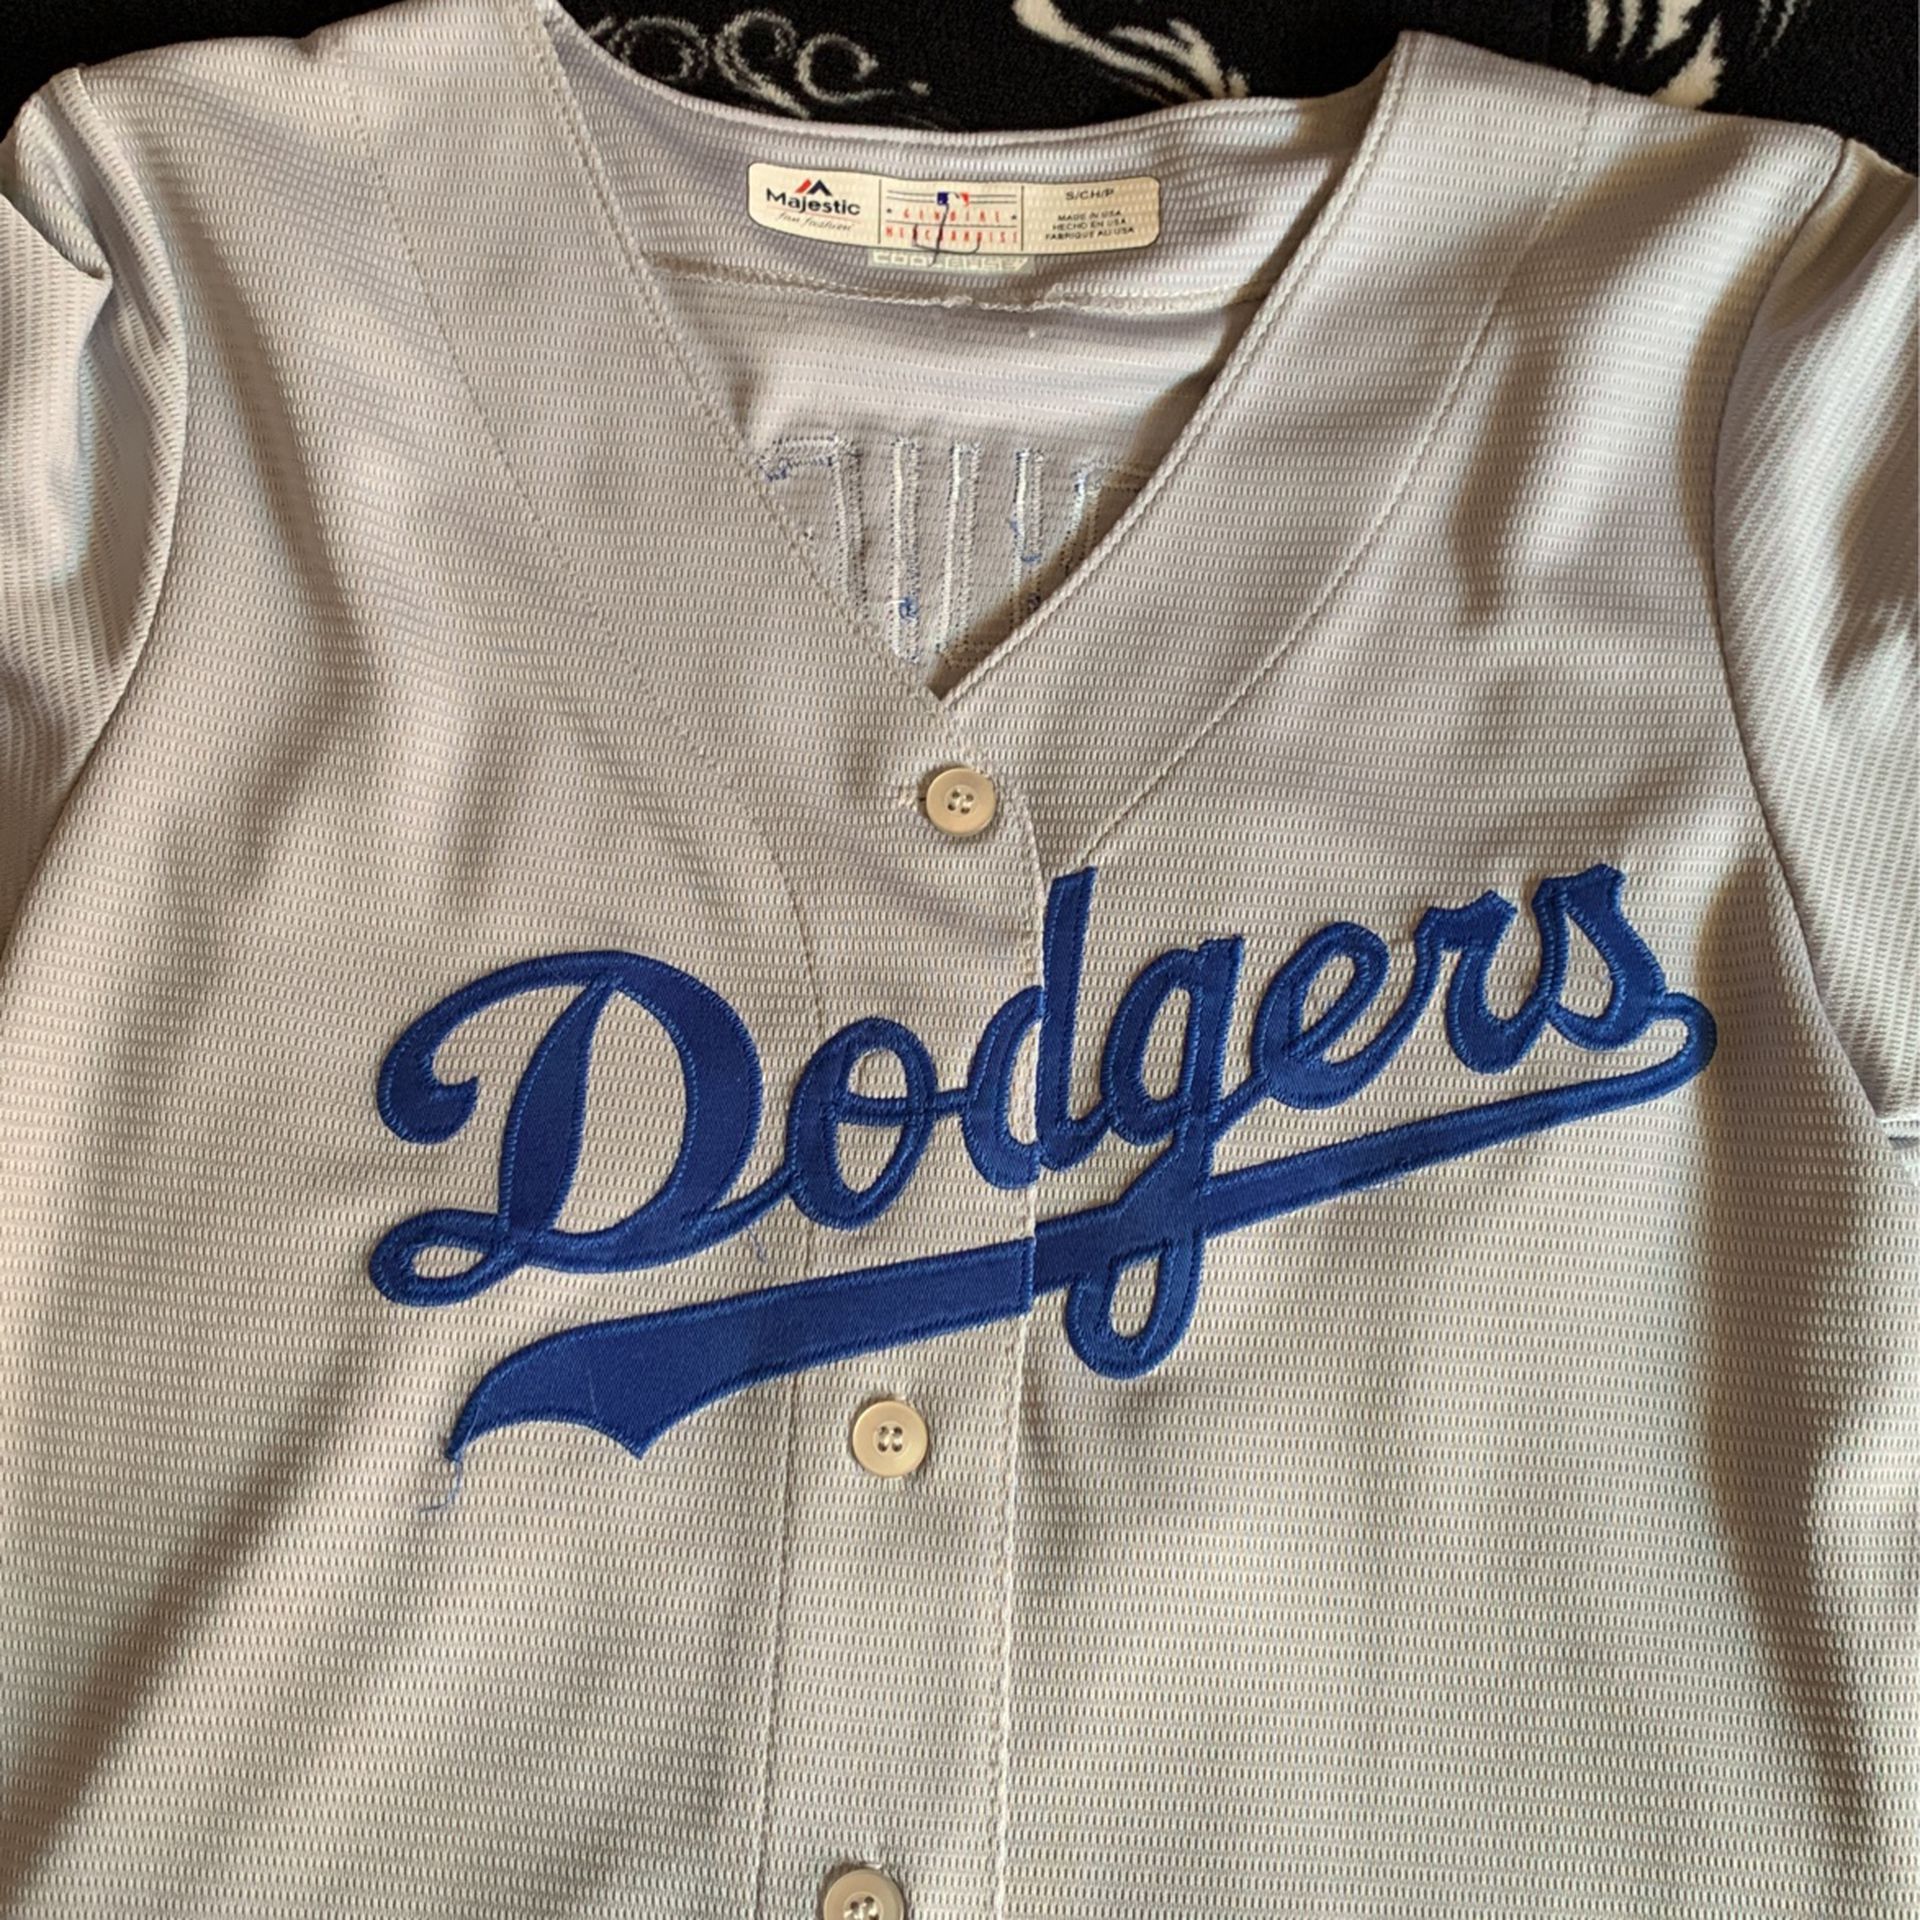 Dodgers Women Jersey Small for Sale in Highland Park, CA - OfferUp